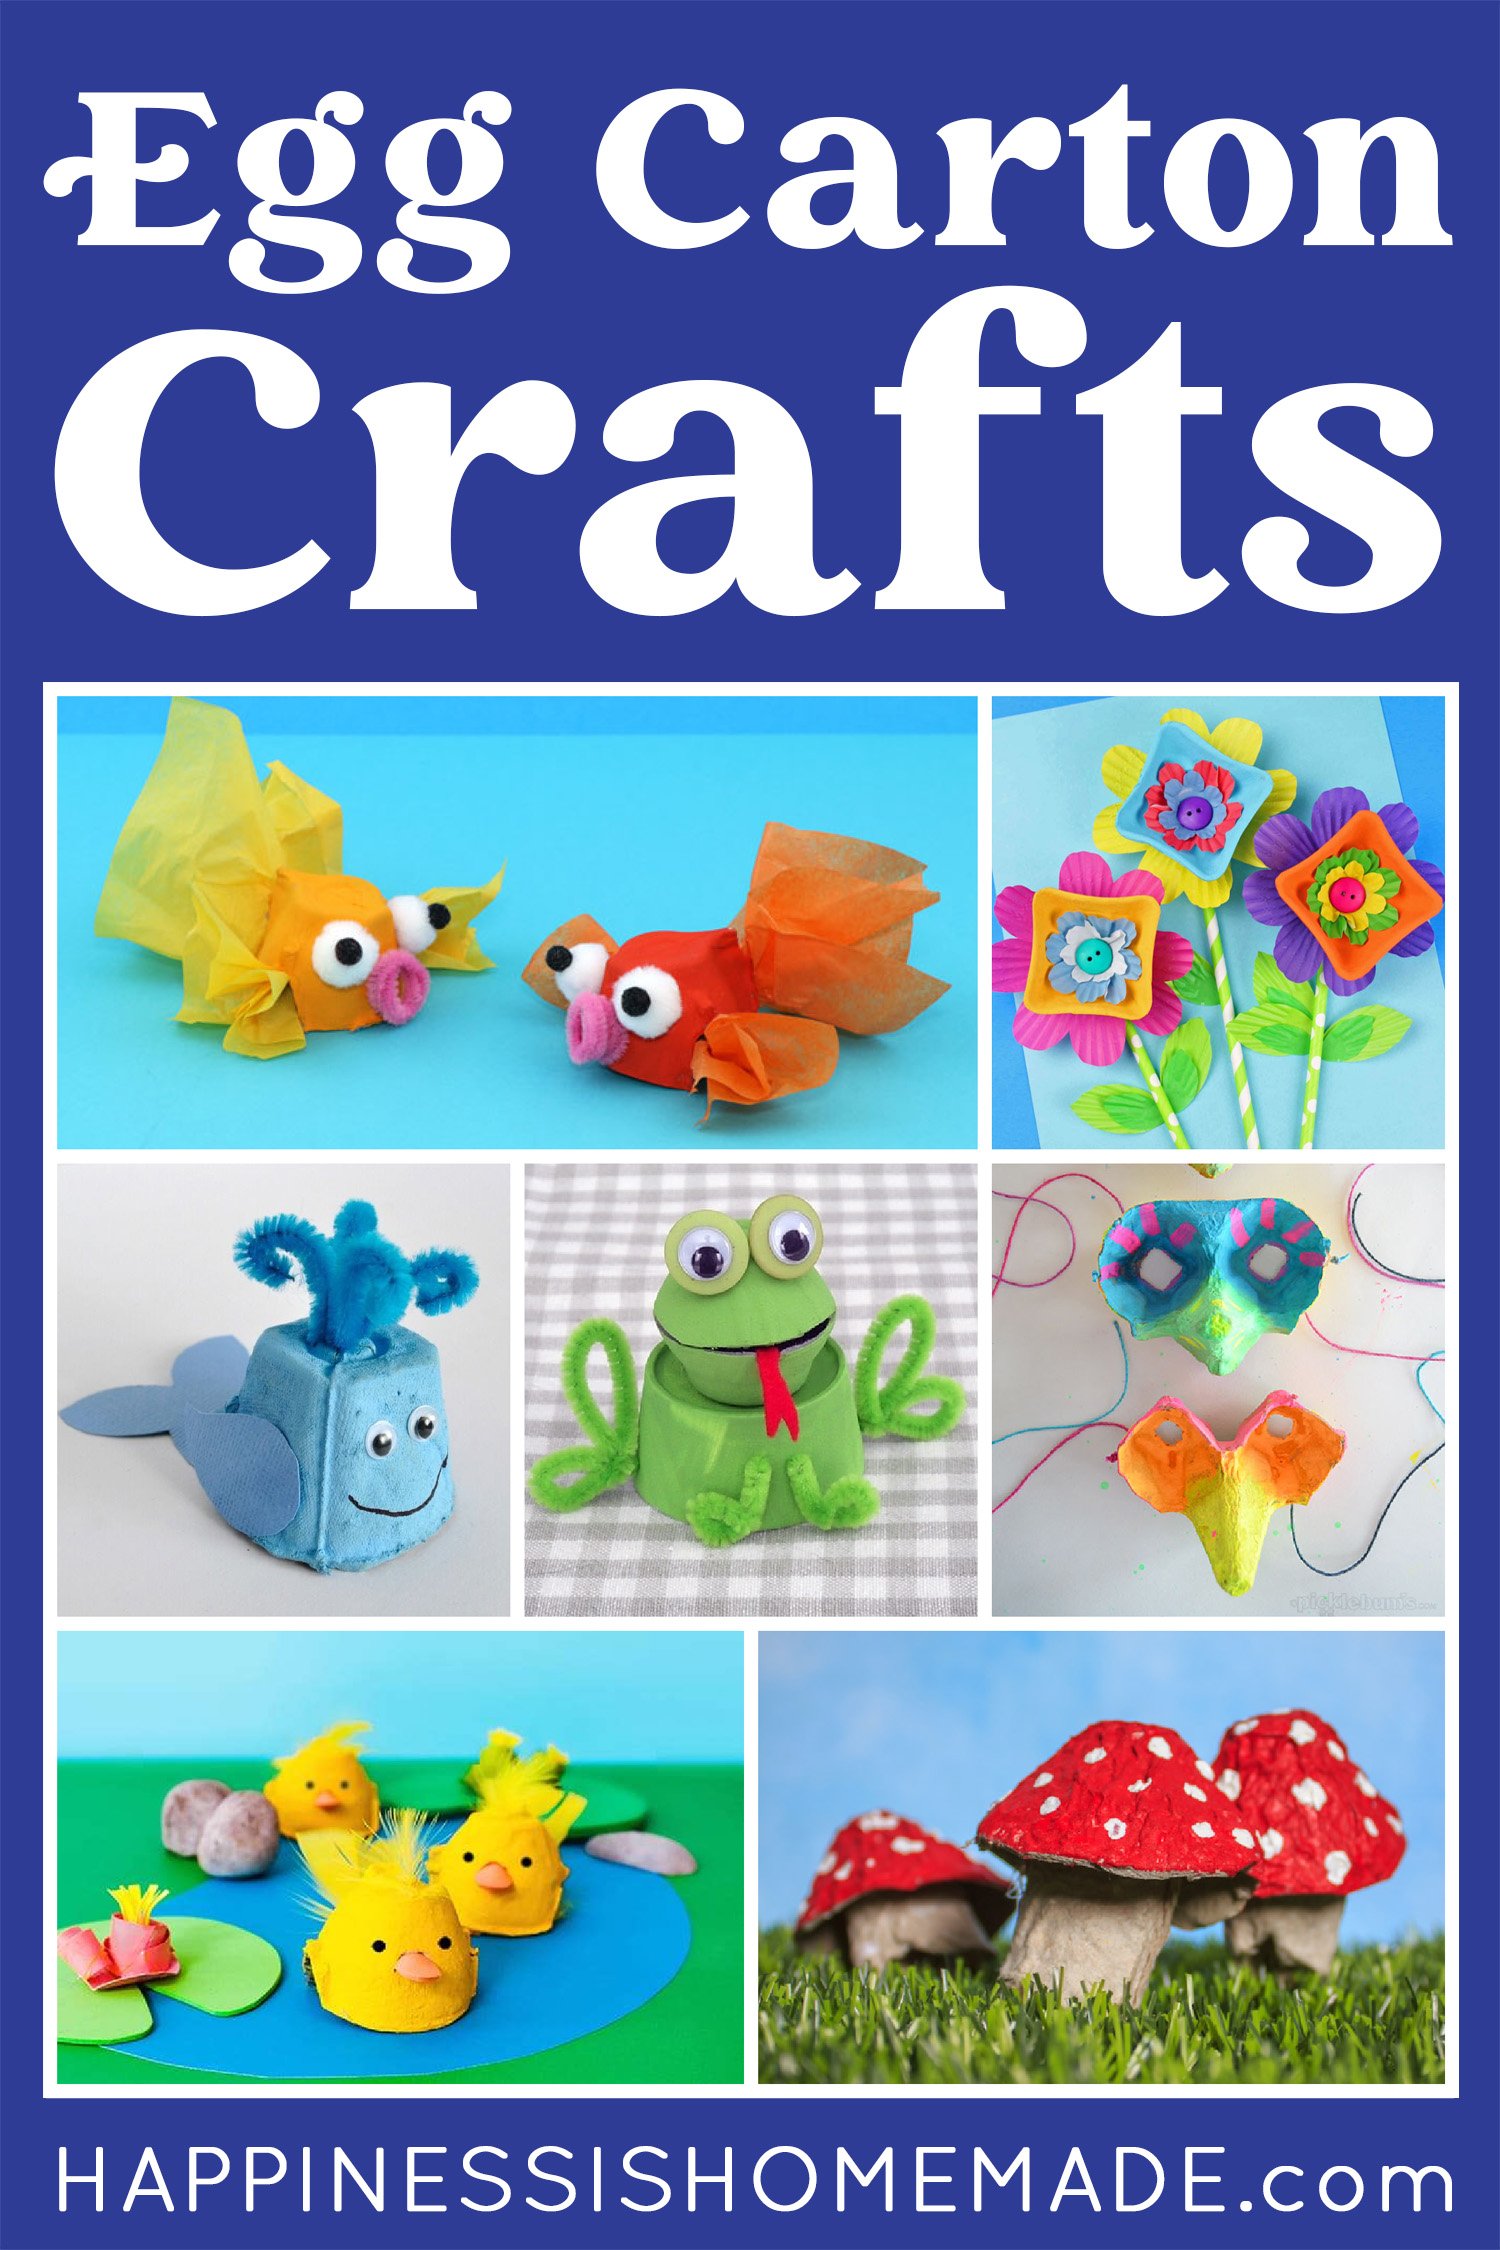 "Egg Carton Crafts for Kids" graphic with collage of egg carton craft ideas